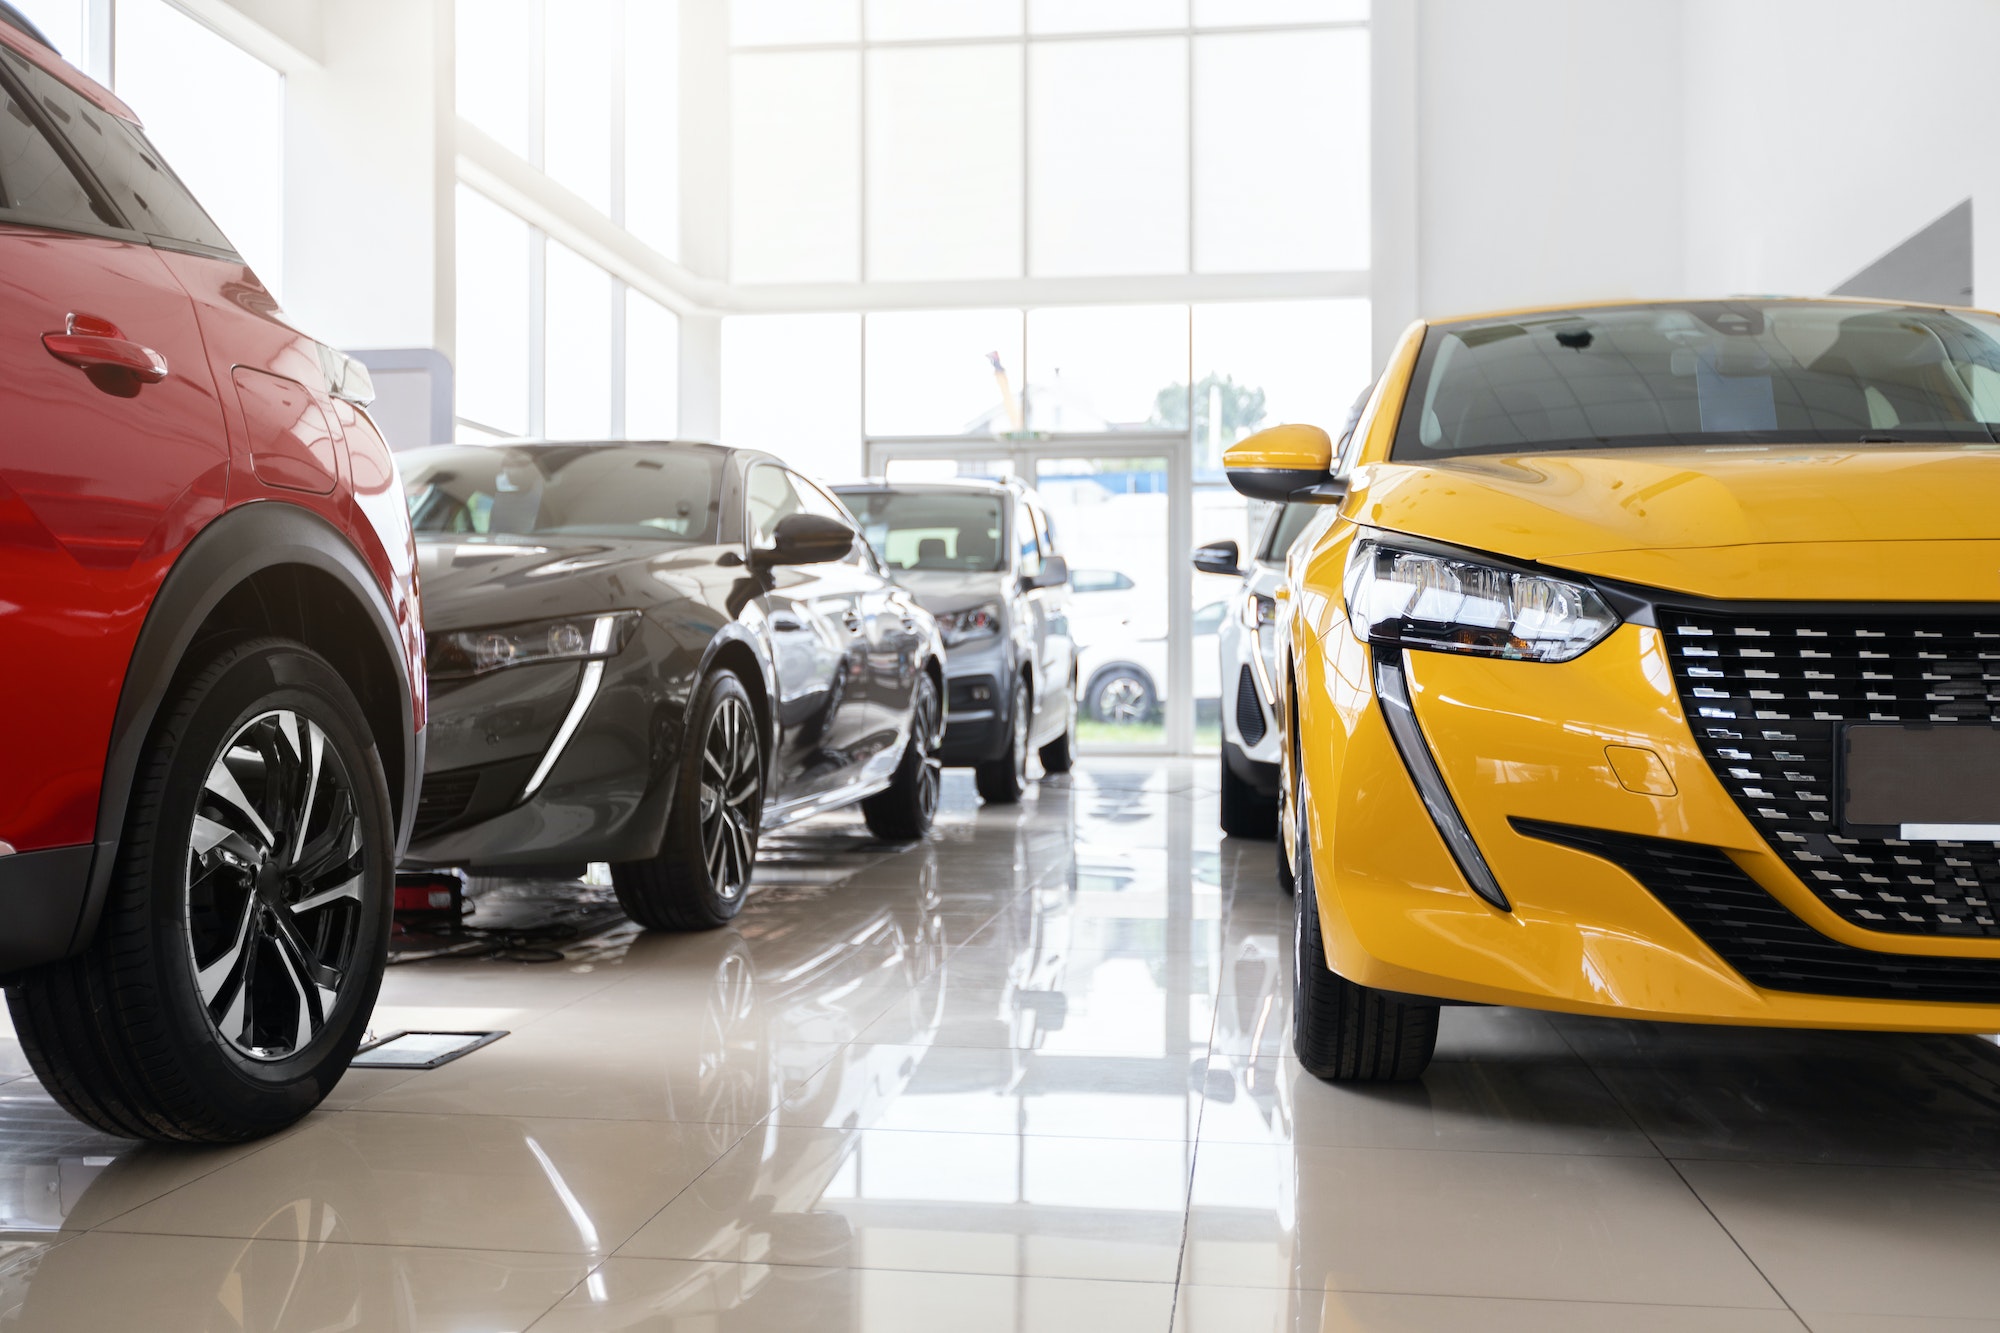 Luxury cars in a car dealership are an example of direct competition.